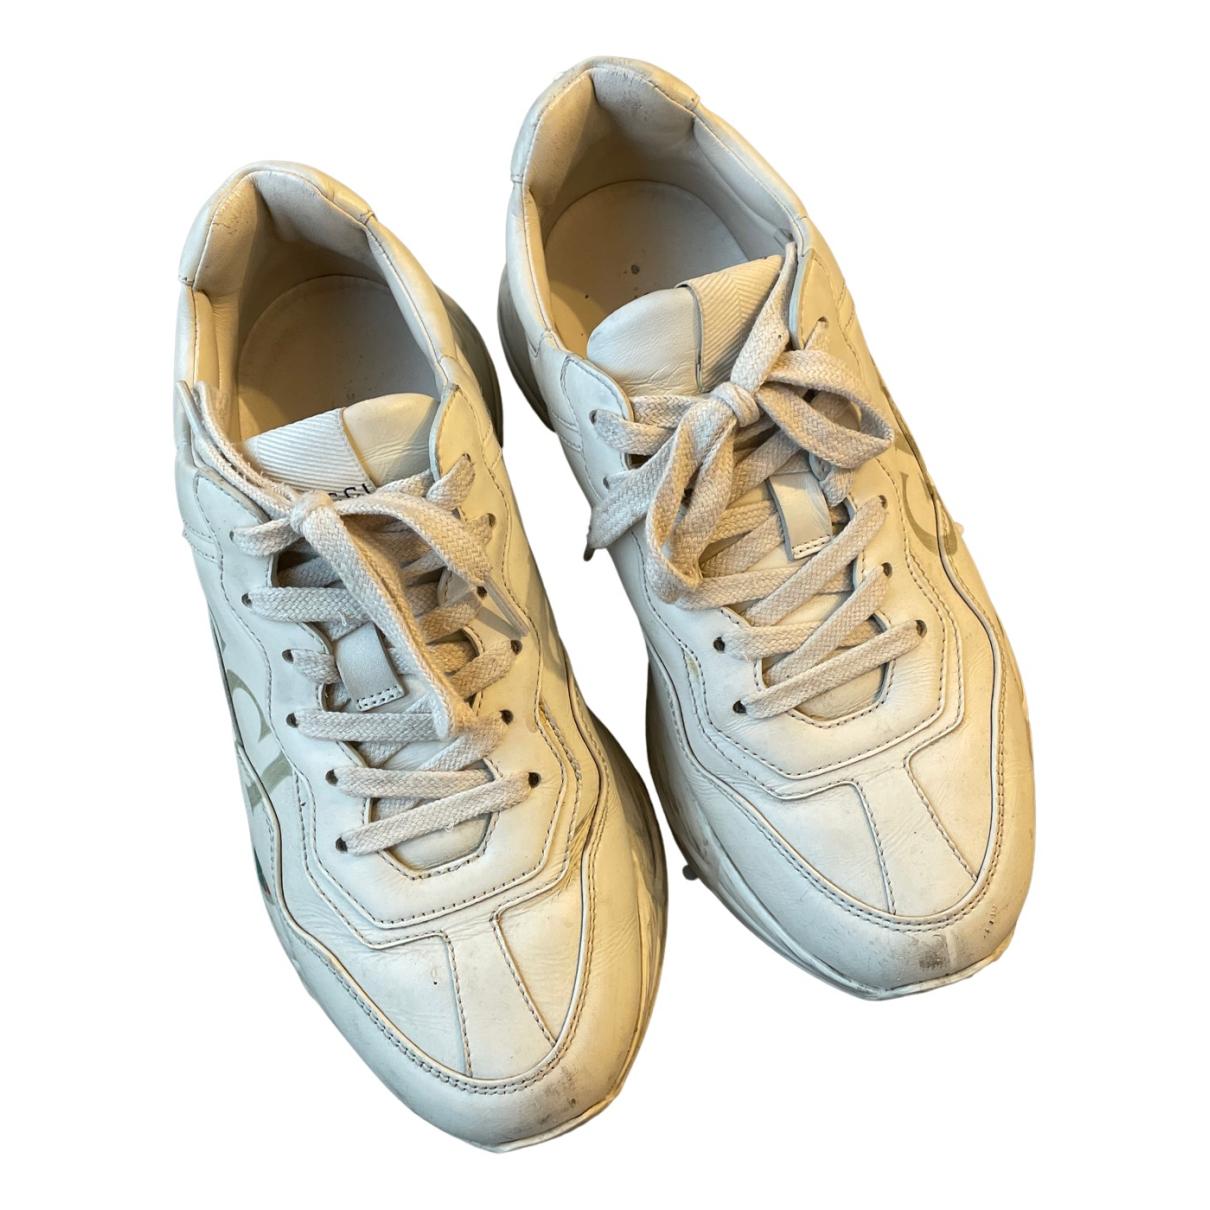 Run away leather trainers Louis Vuitton White size 37 EU in Leather -  32126082